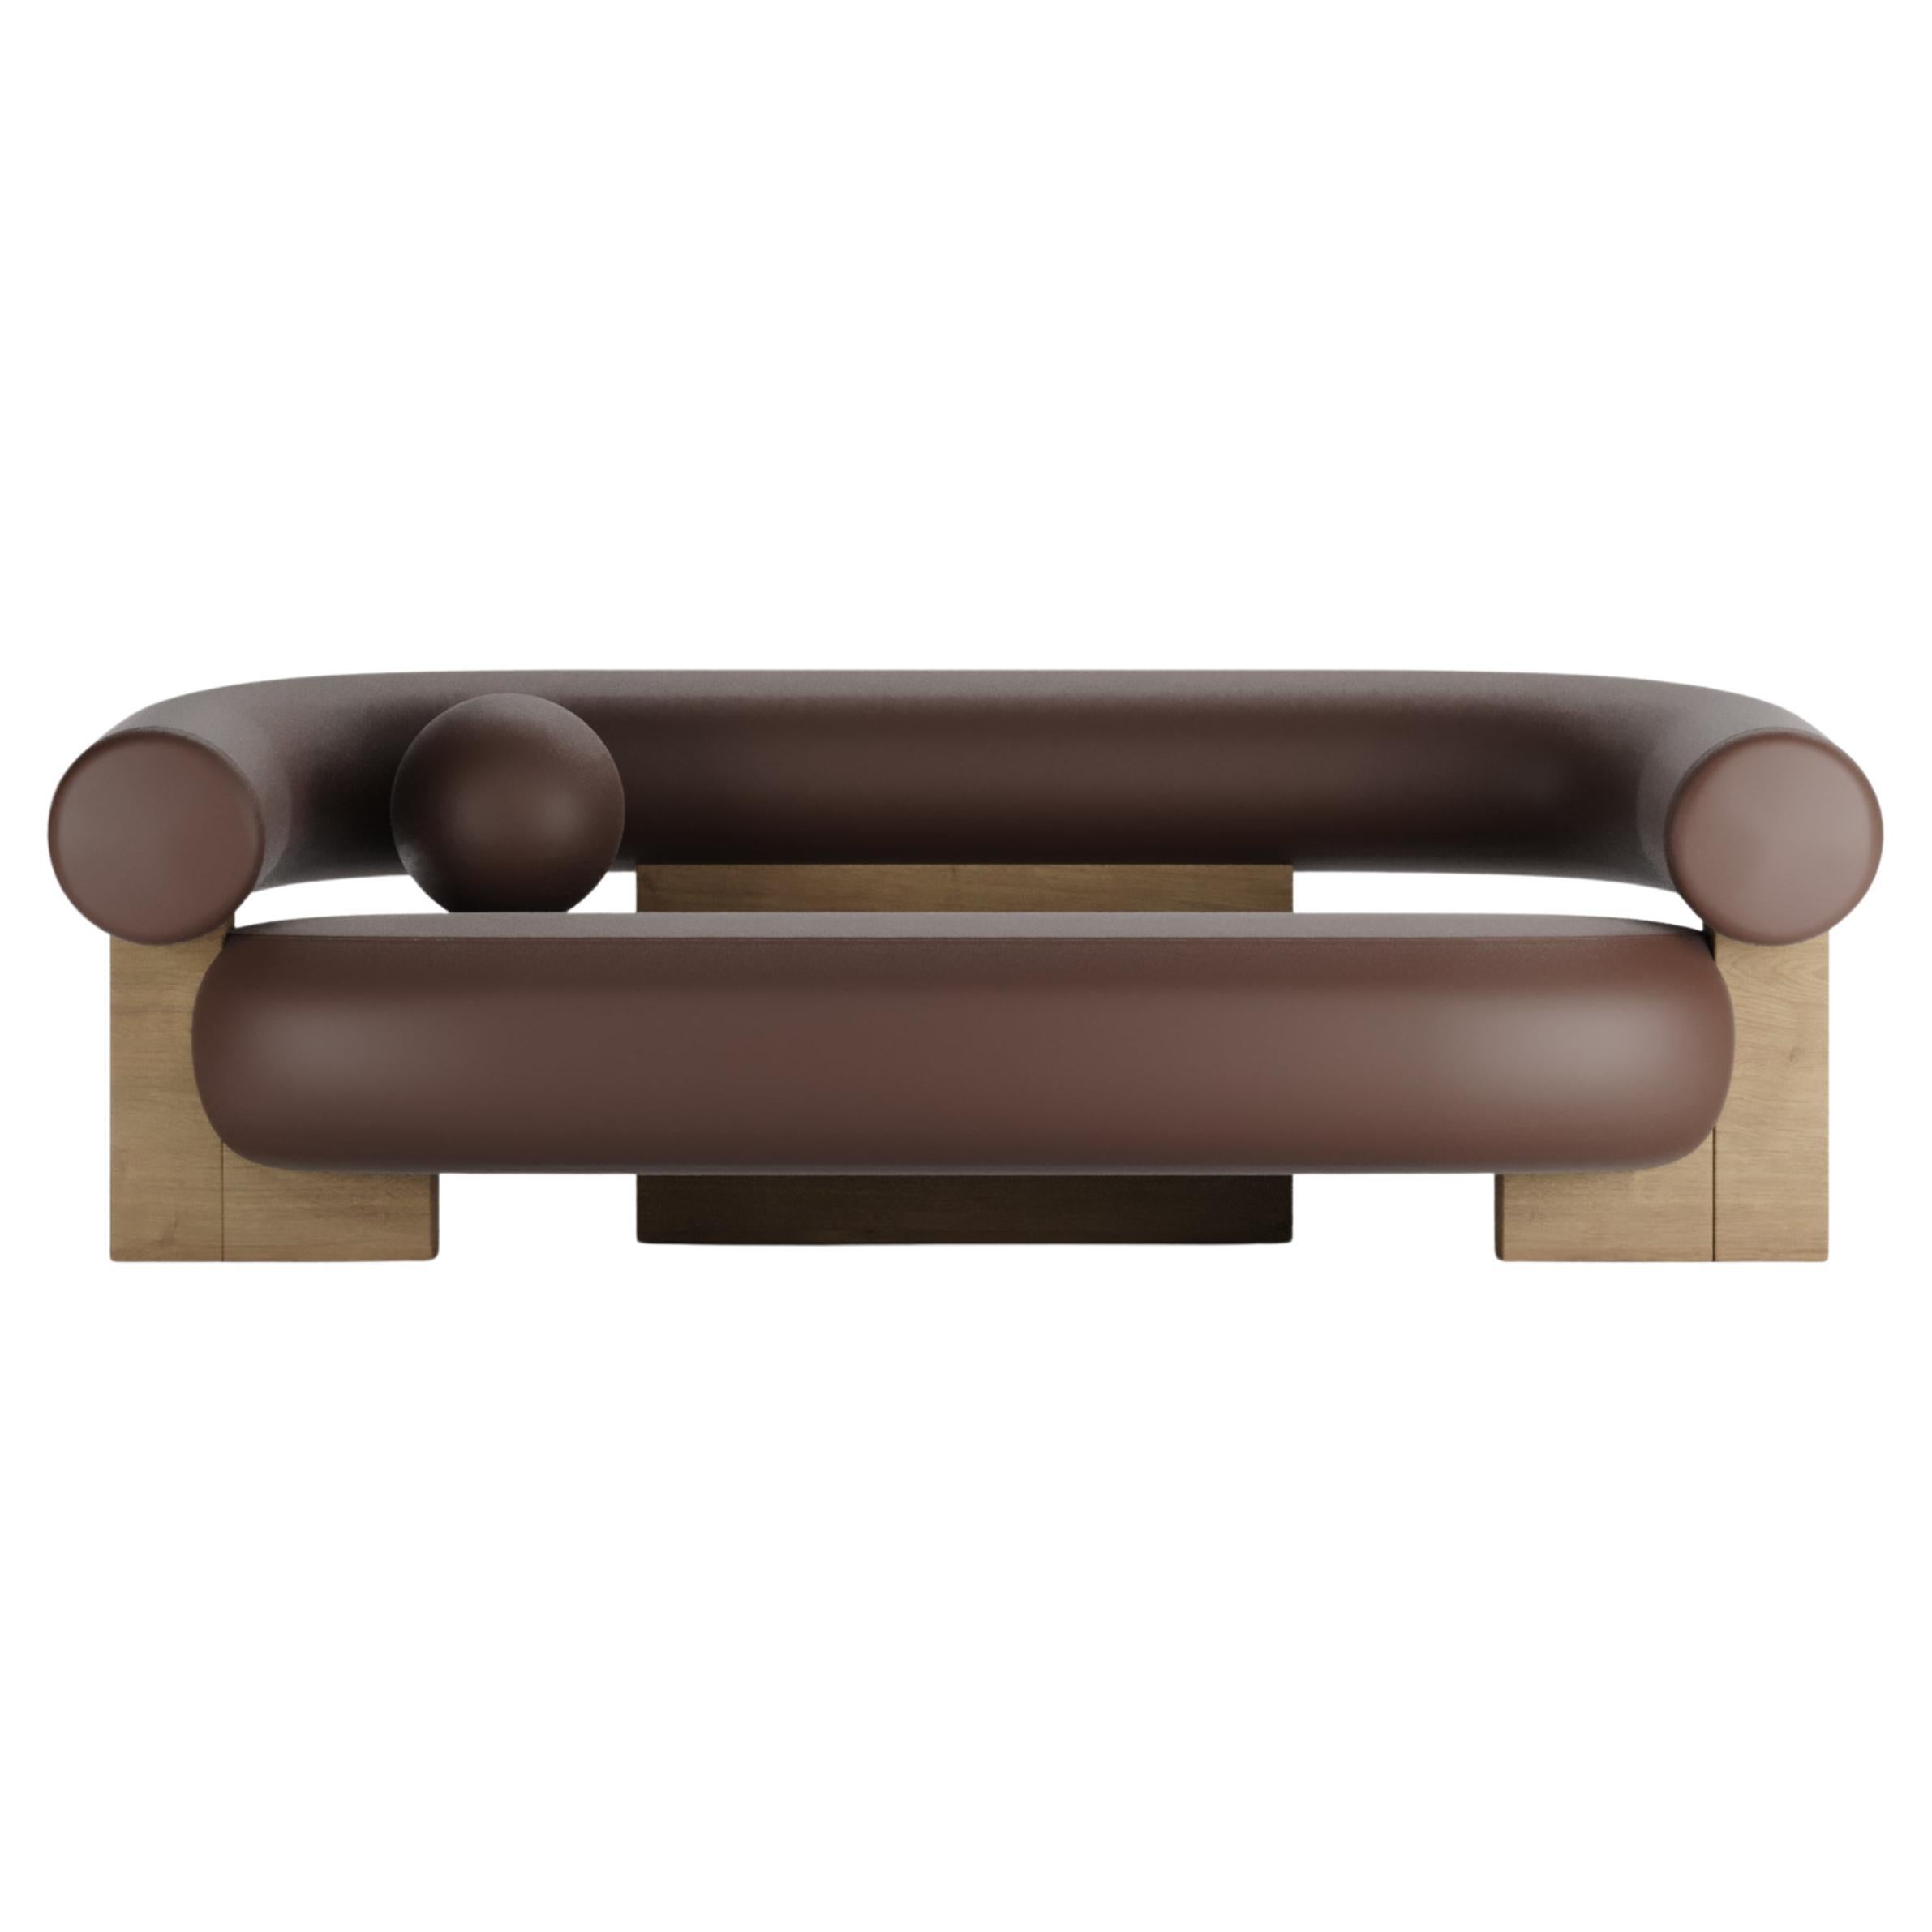 Contemporary Modern Cassete Sofa in Leather & Wood by Collector Studio For Sale